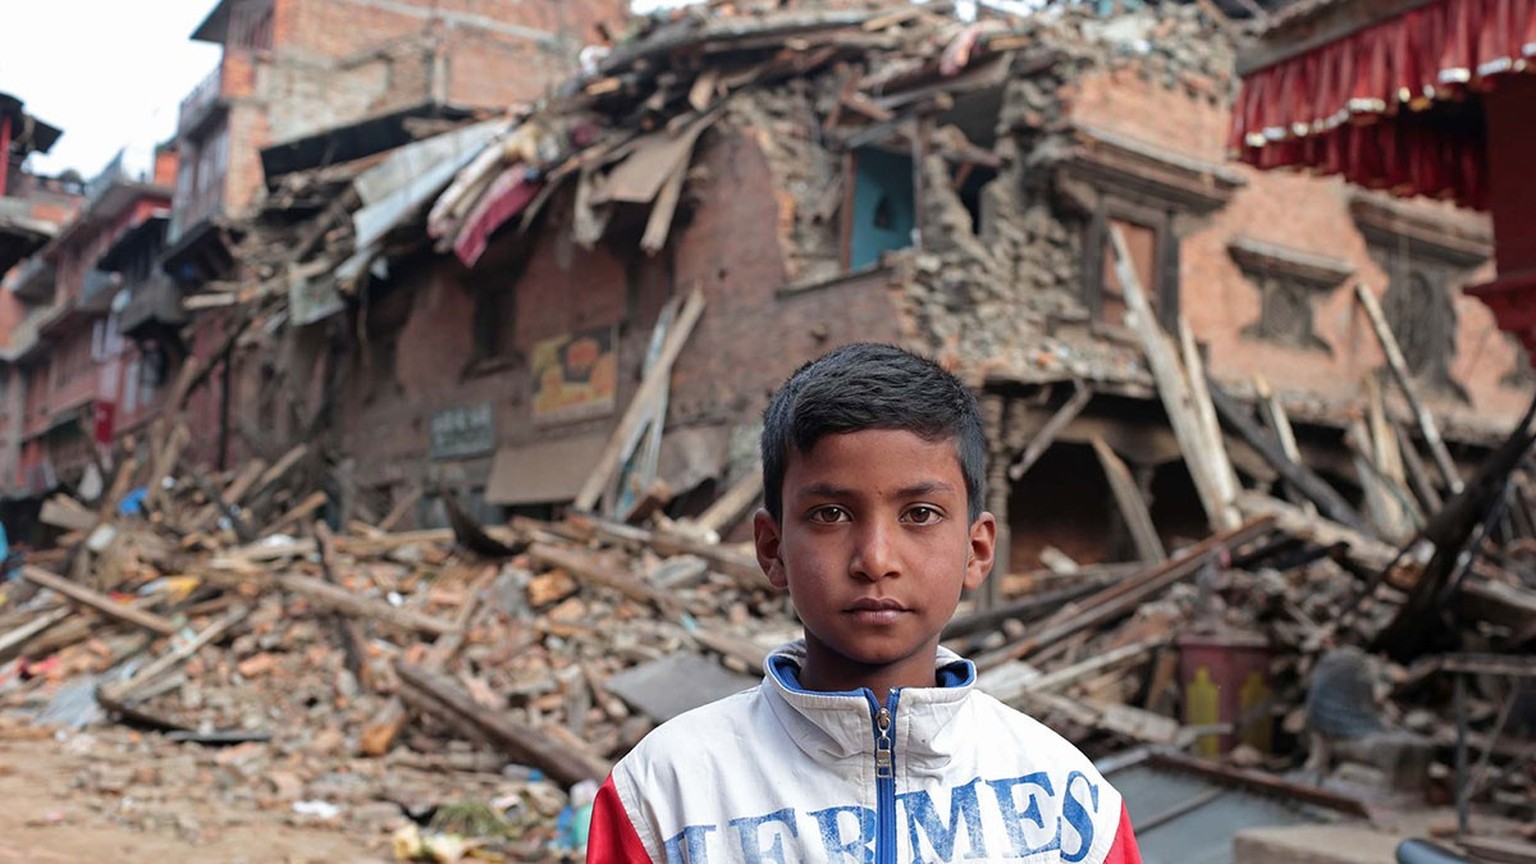 On 28 April, an 11-year-old boy stands in front of his destroyed home, in the city of Bhaktapur, Kathmandu Valley. Two of his relatives died in the massive earthquake.

On 29 April 2015 in Nepal, sear ...